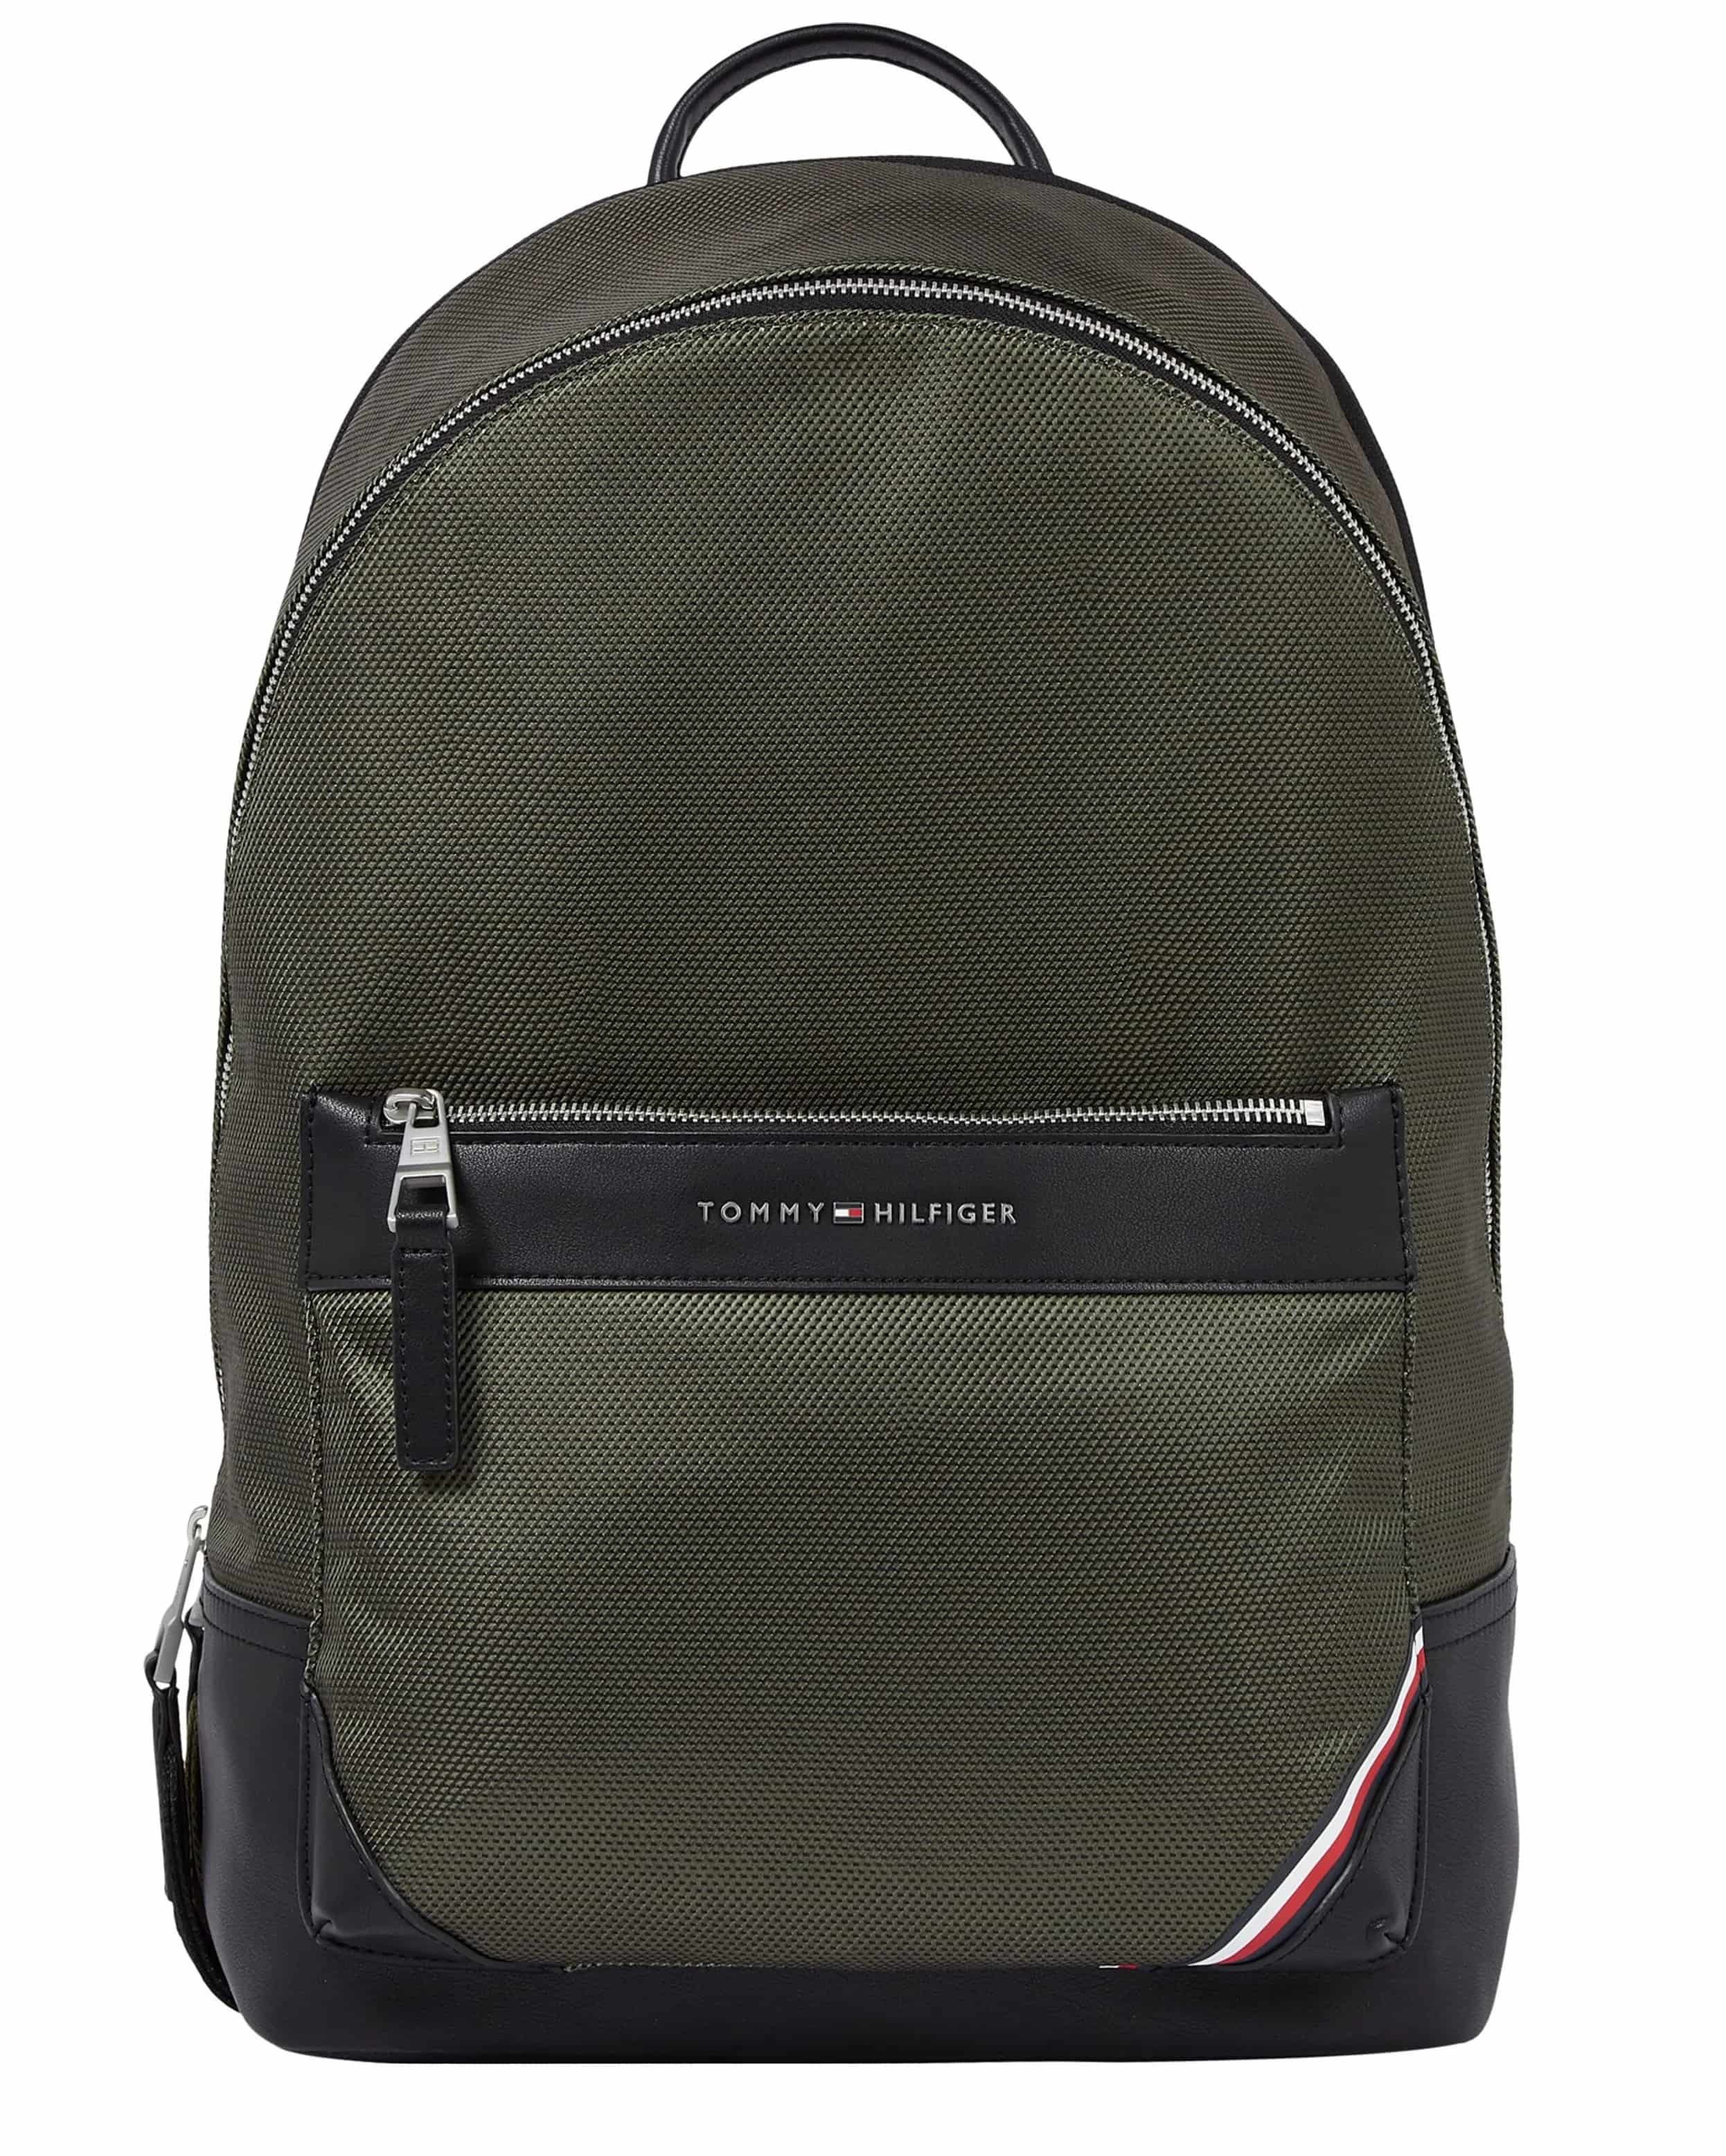 BALO TOMMY HILFIGER ESSENTIAL 1985 NYLON BACKPACK 8